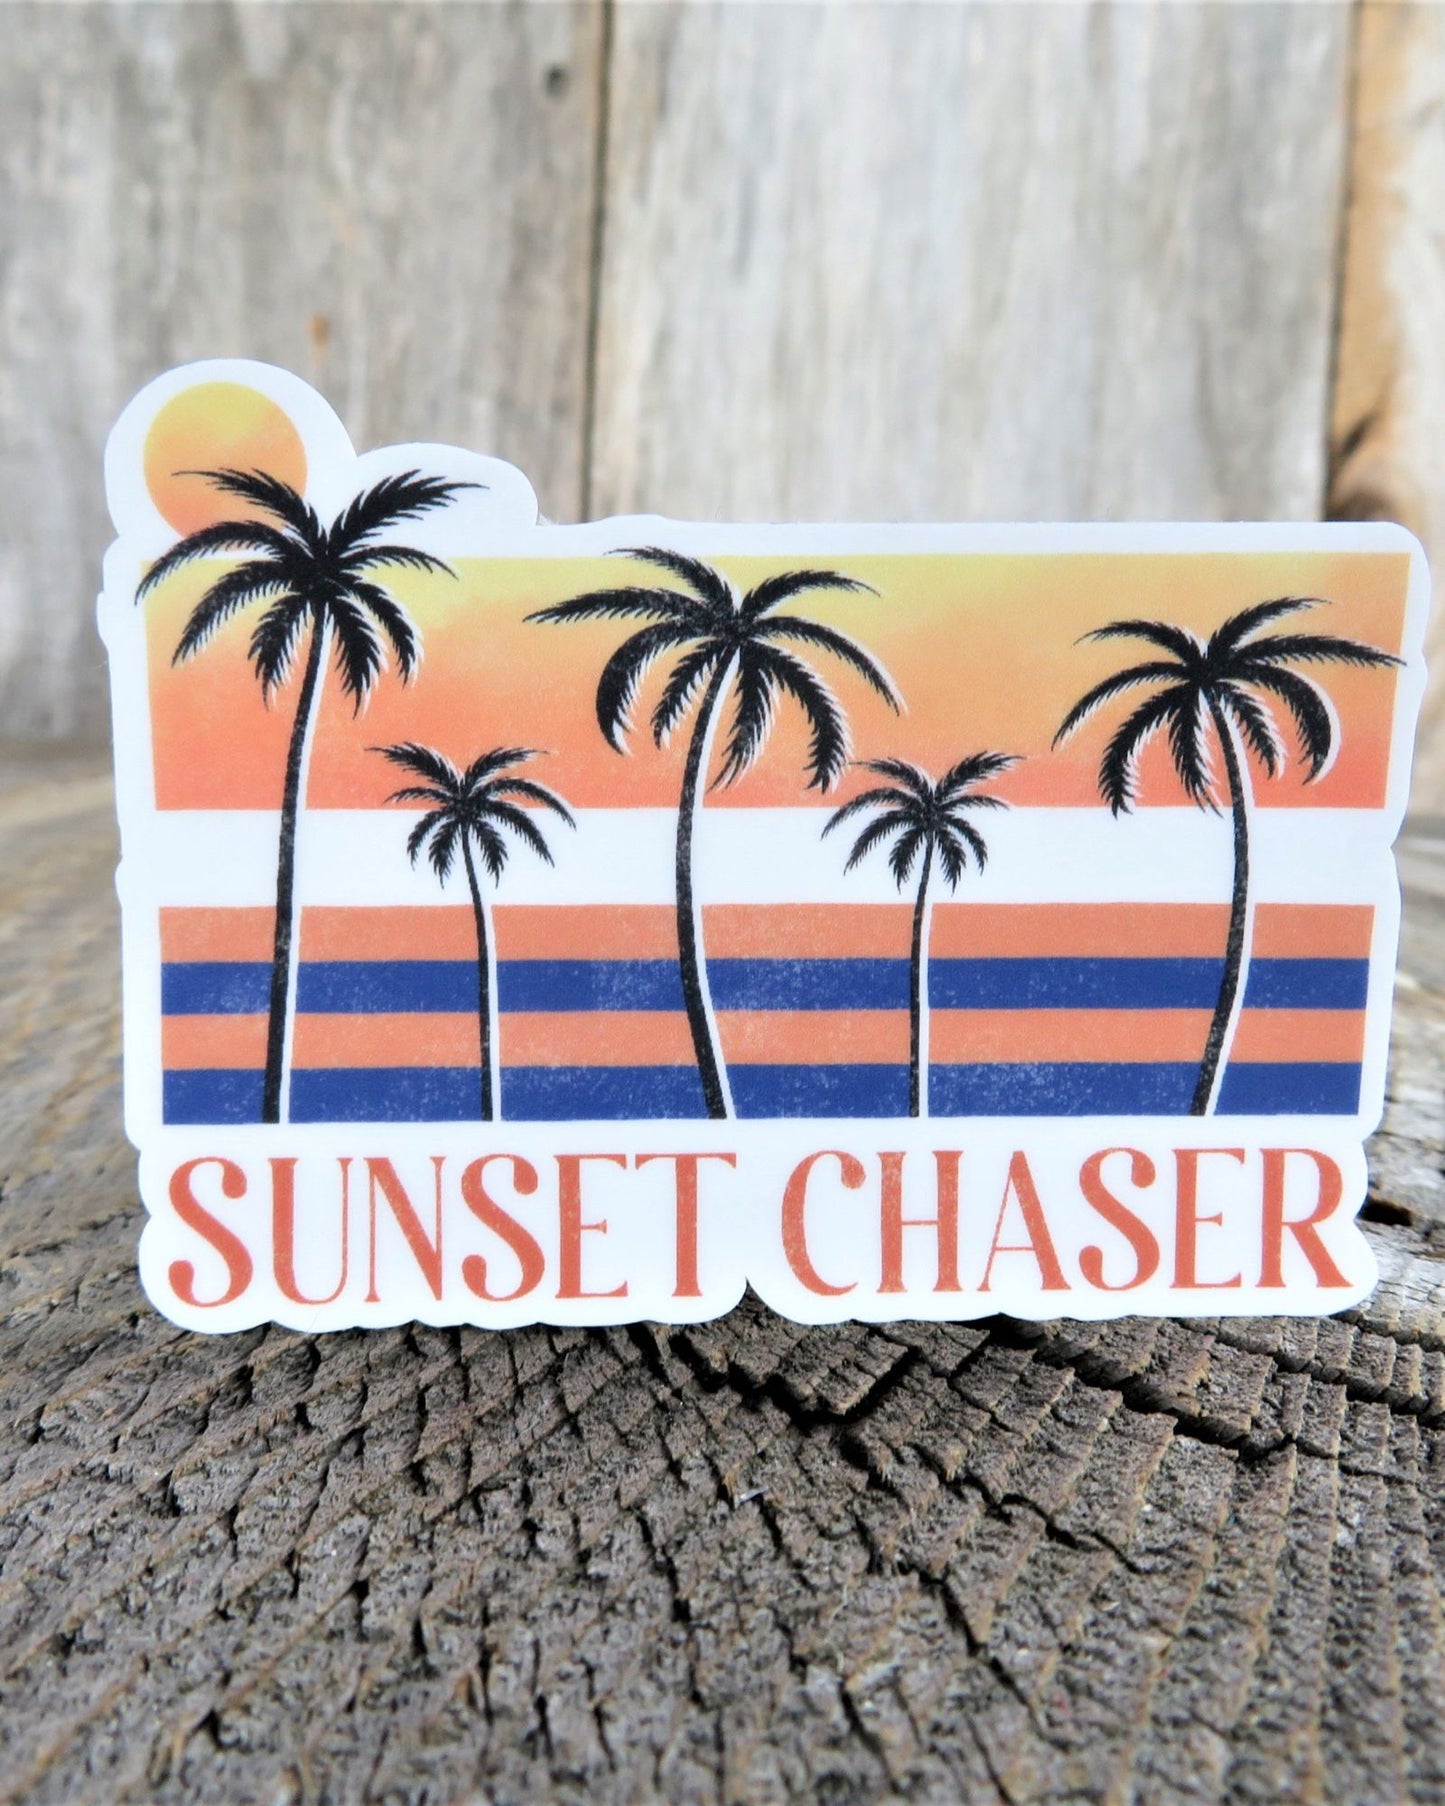 Sunset Chaser Sticker Summer Ocean Retro Colored Decal Palm Tree Waterproof Car Water Bottle Laptop